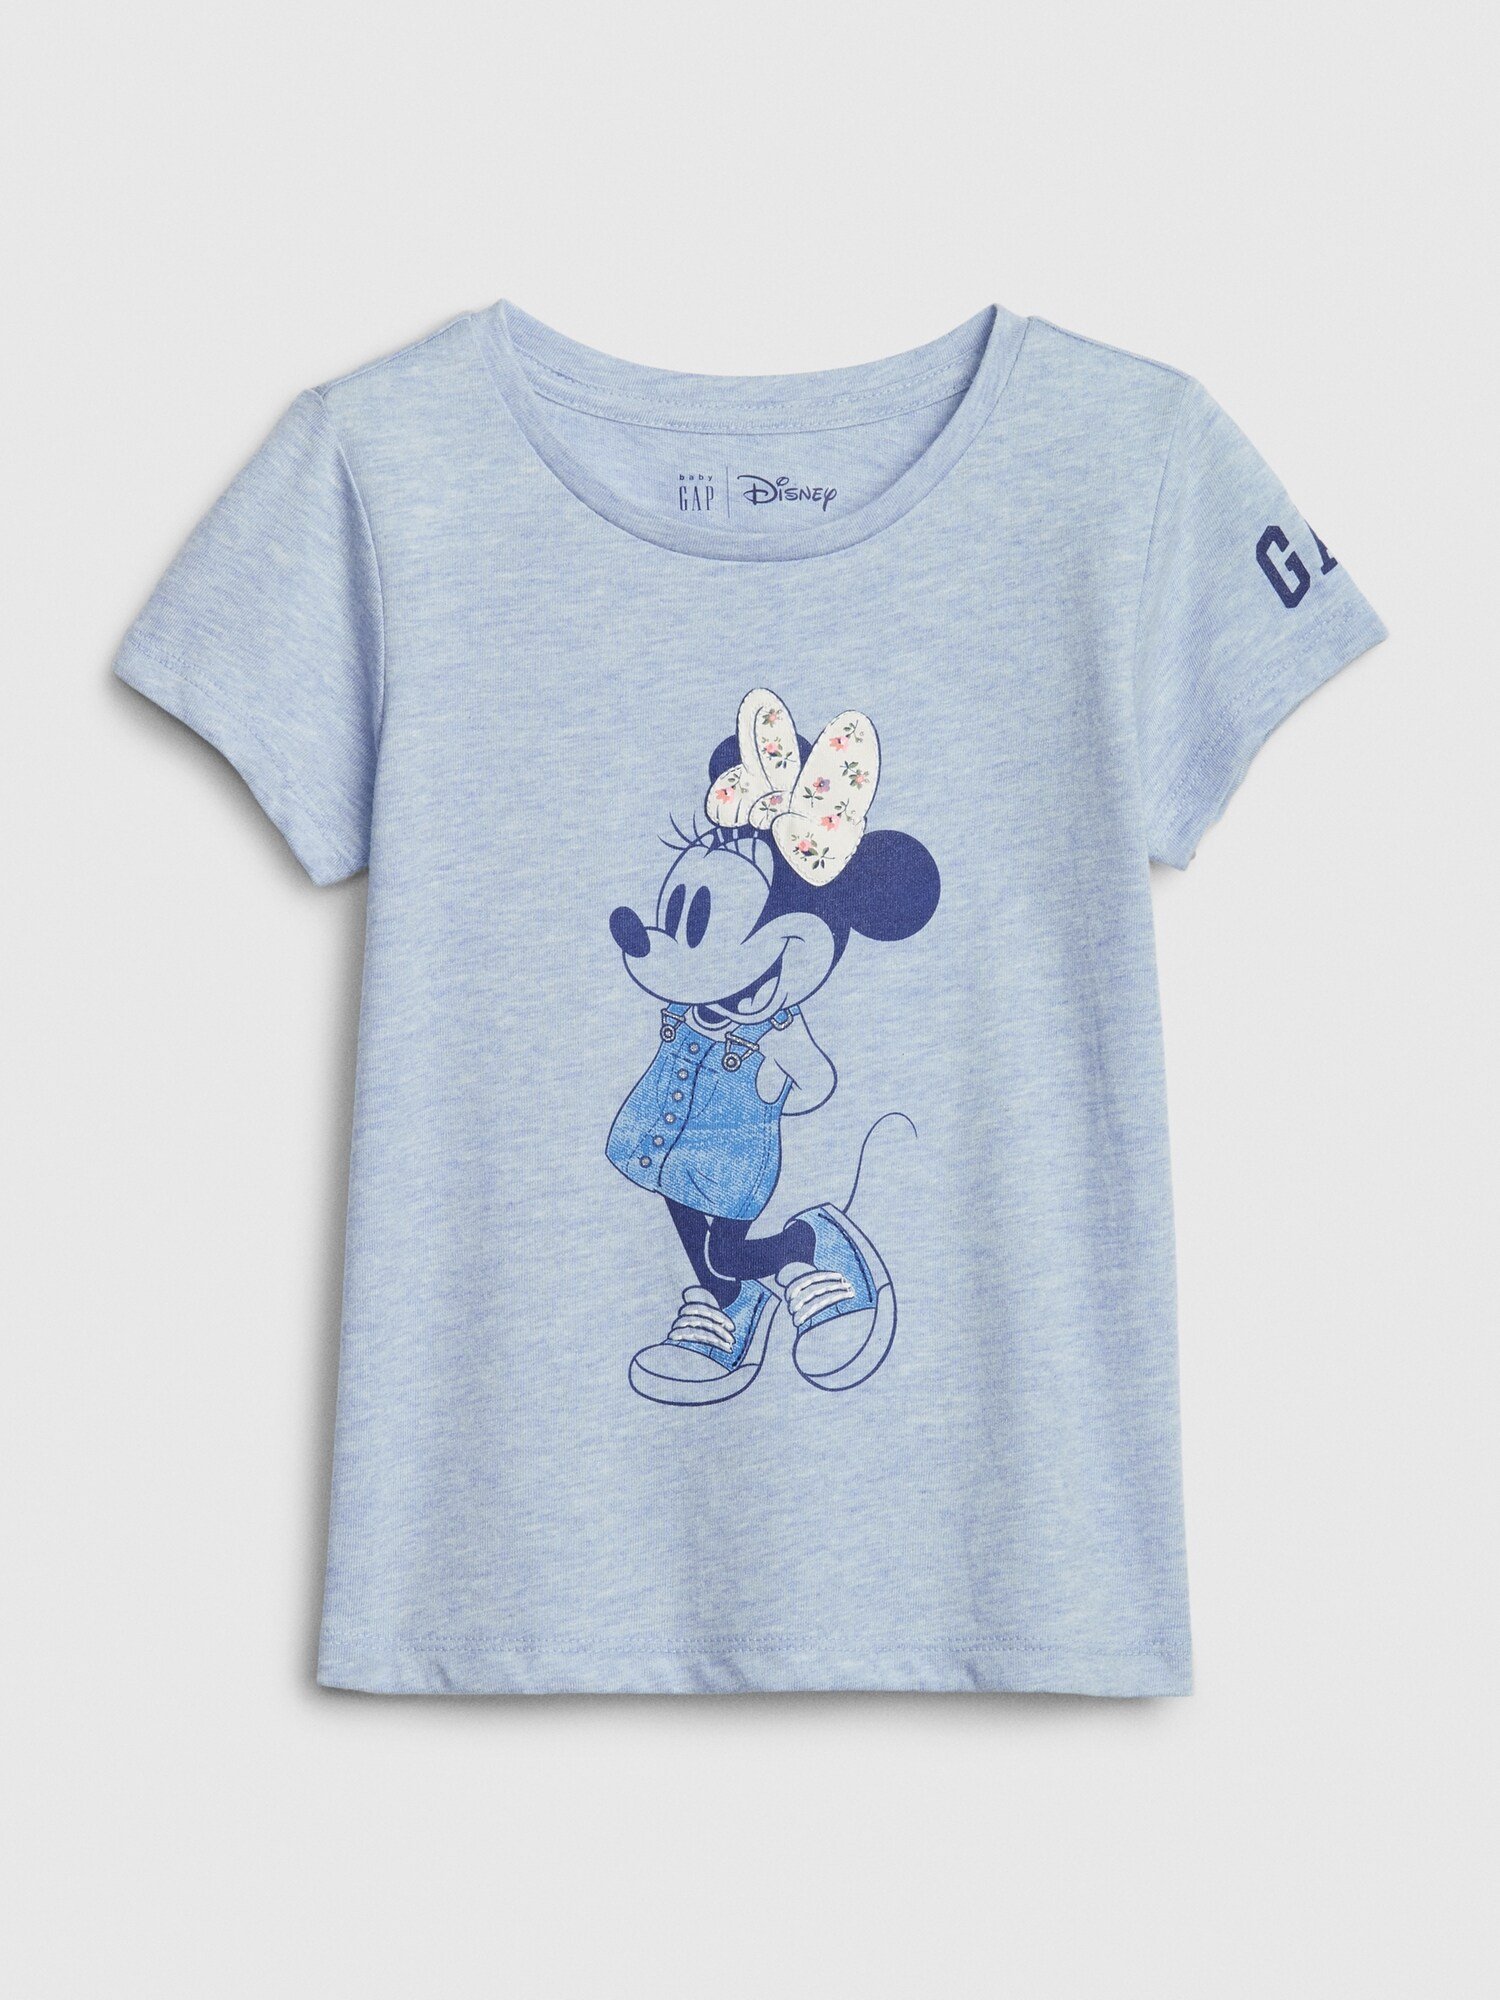 Disney Minnie Mouse T-Shirt product image